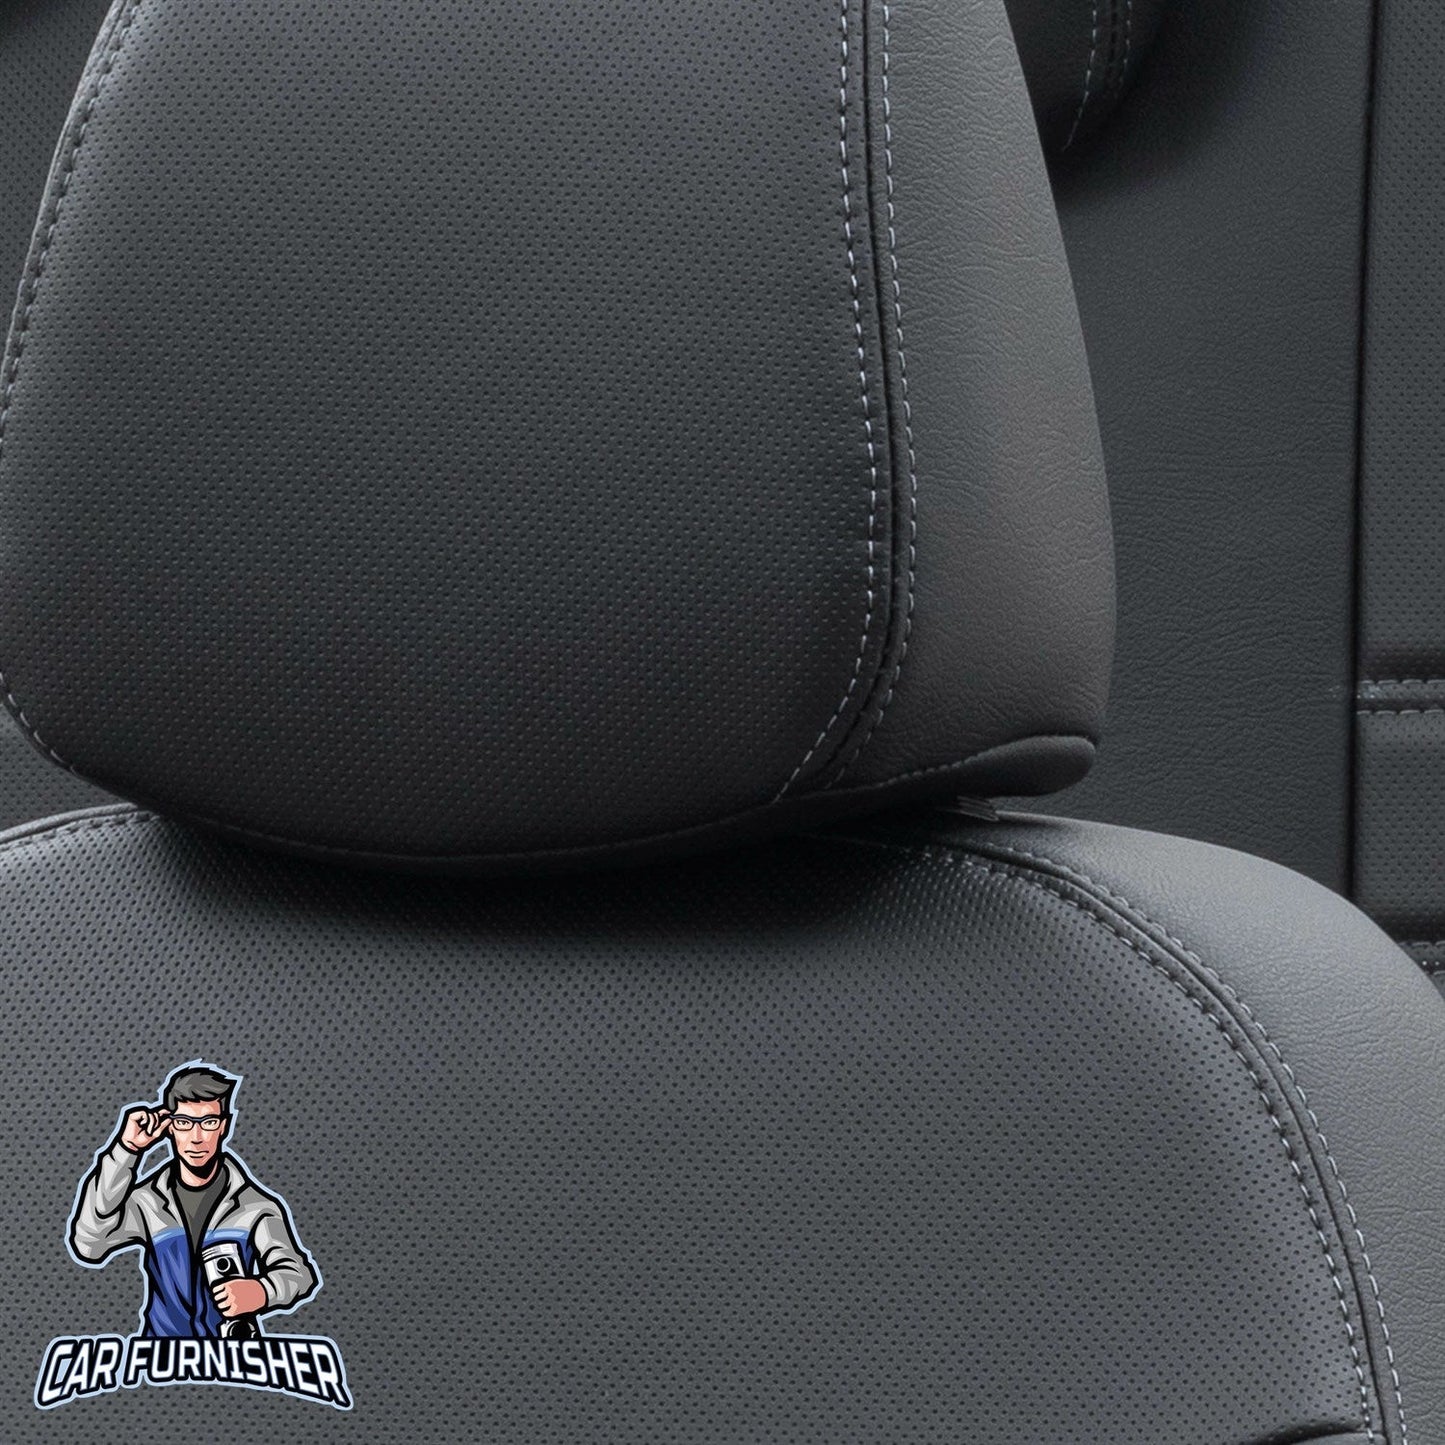 Renault Safrane Seat Covers Istanbul Leather Design Black Leather